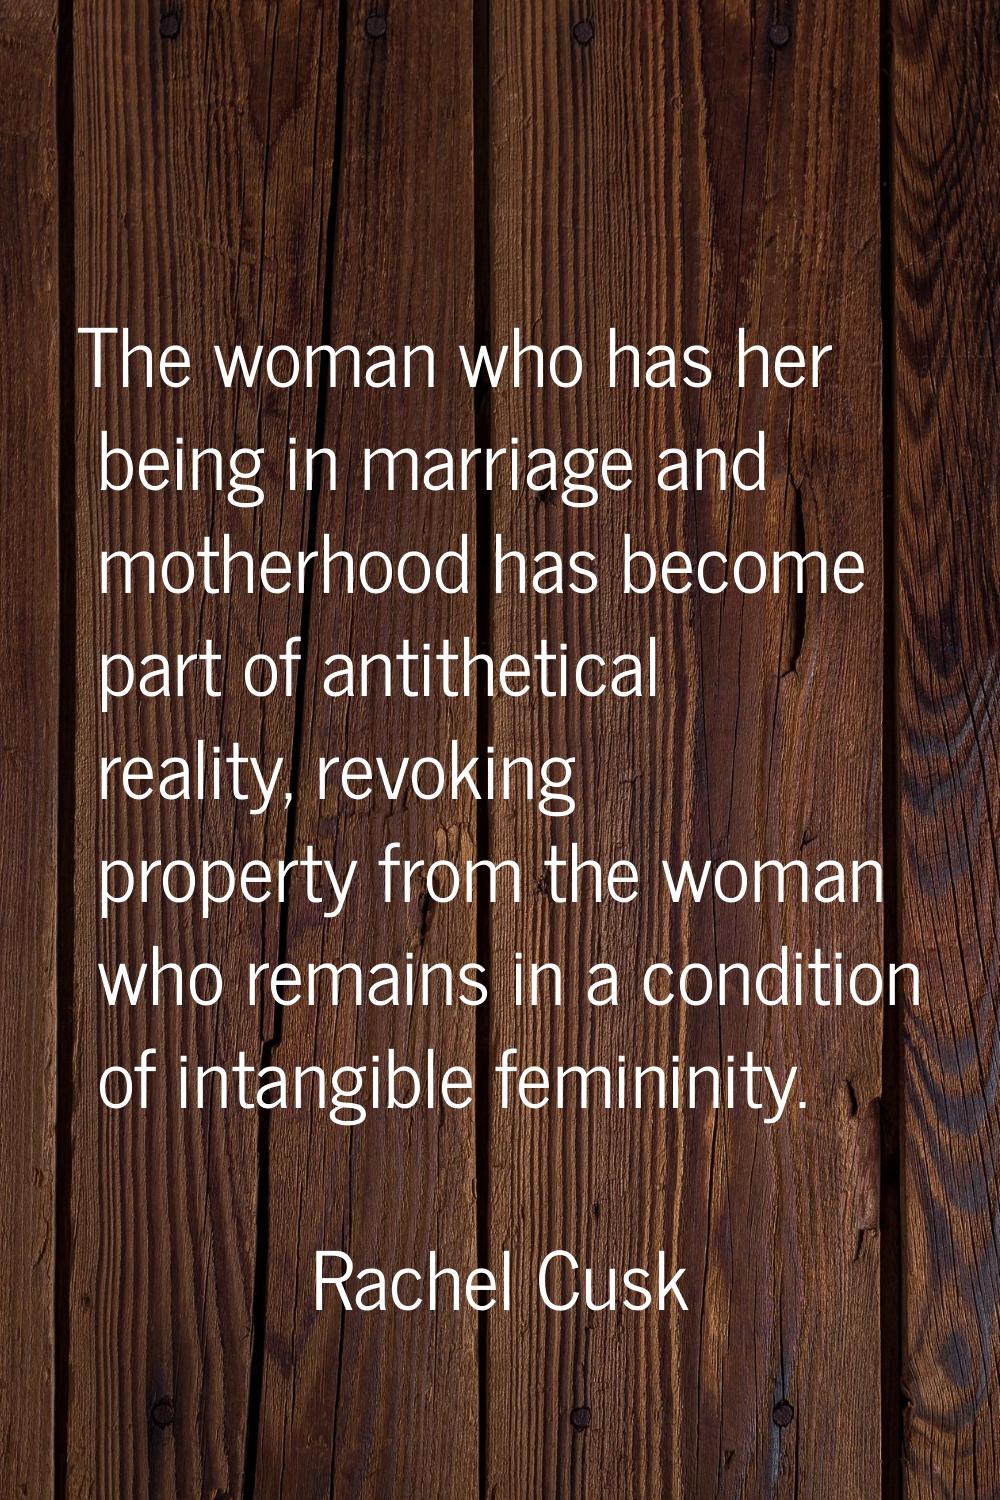 The woman who has her being in marriage and motherhood has become part of antithetical reality, rev